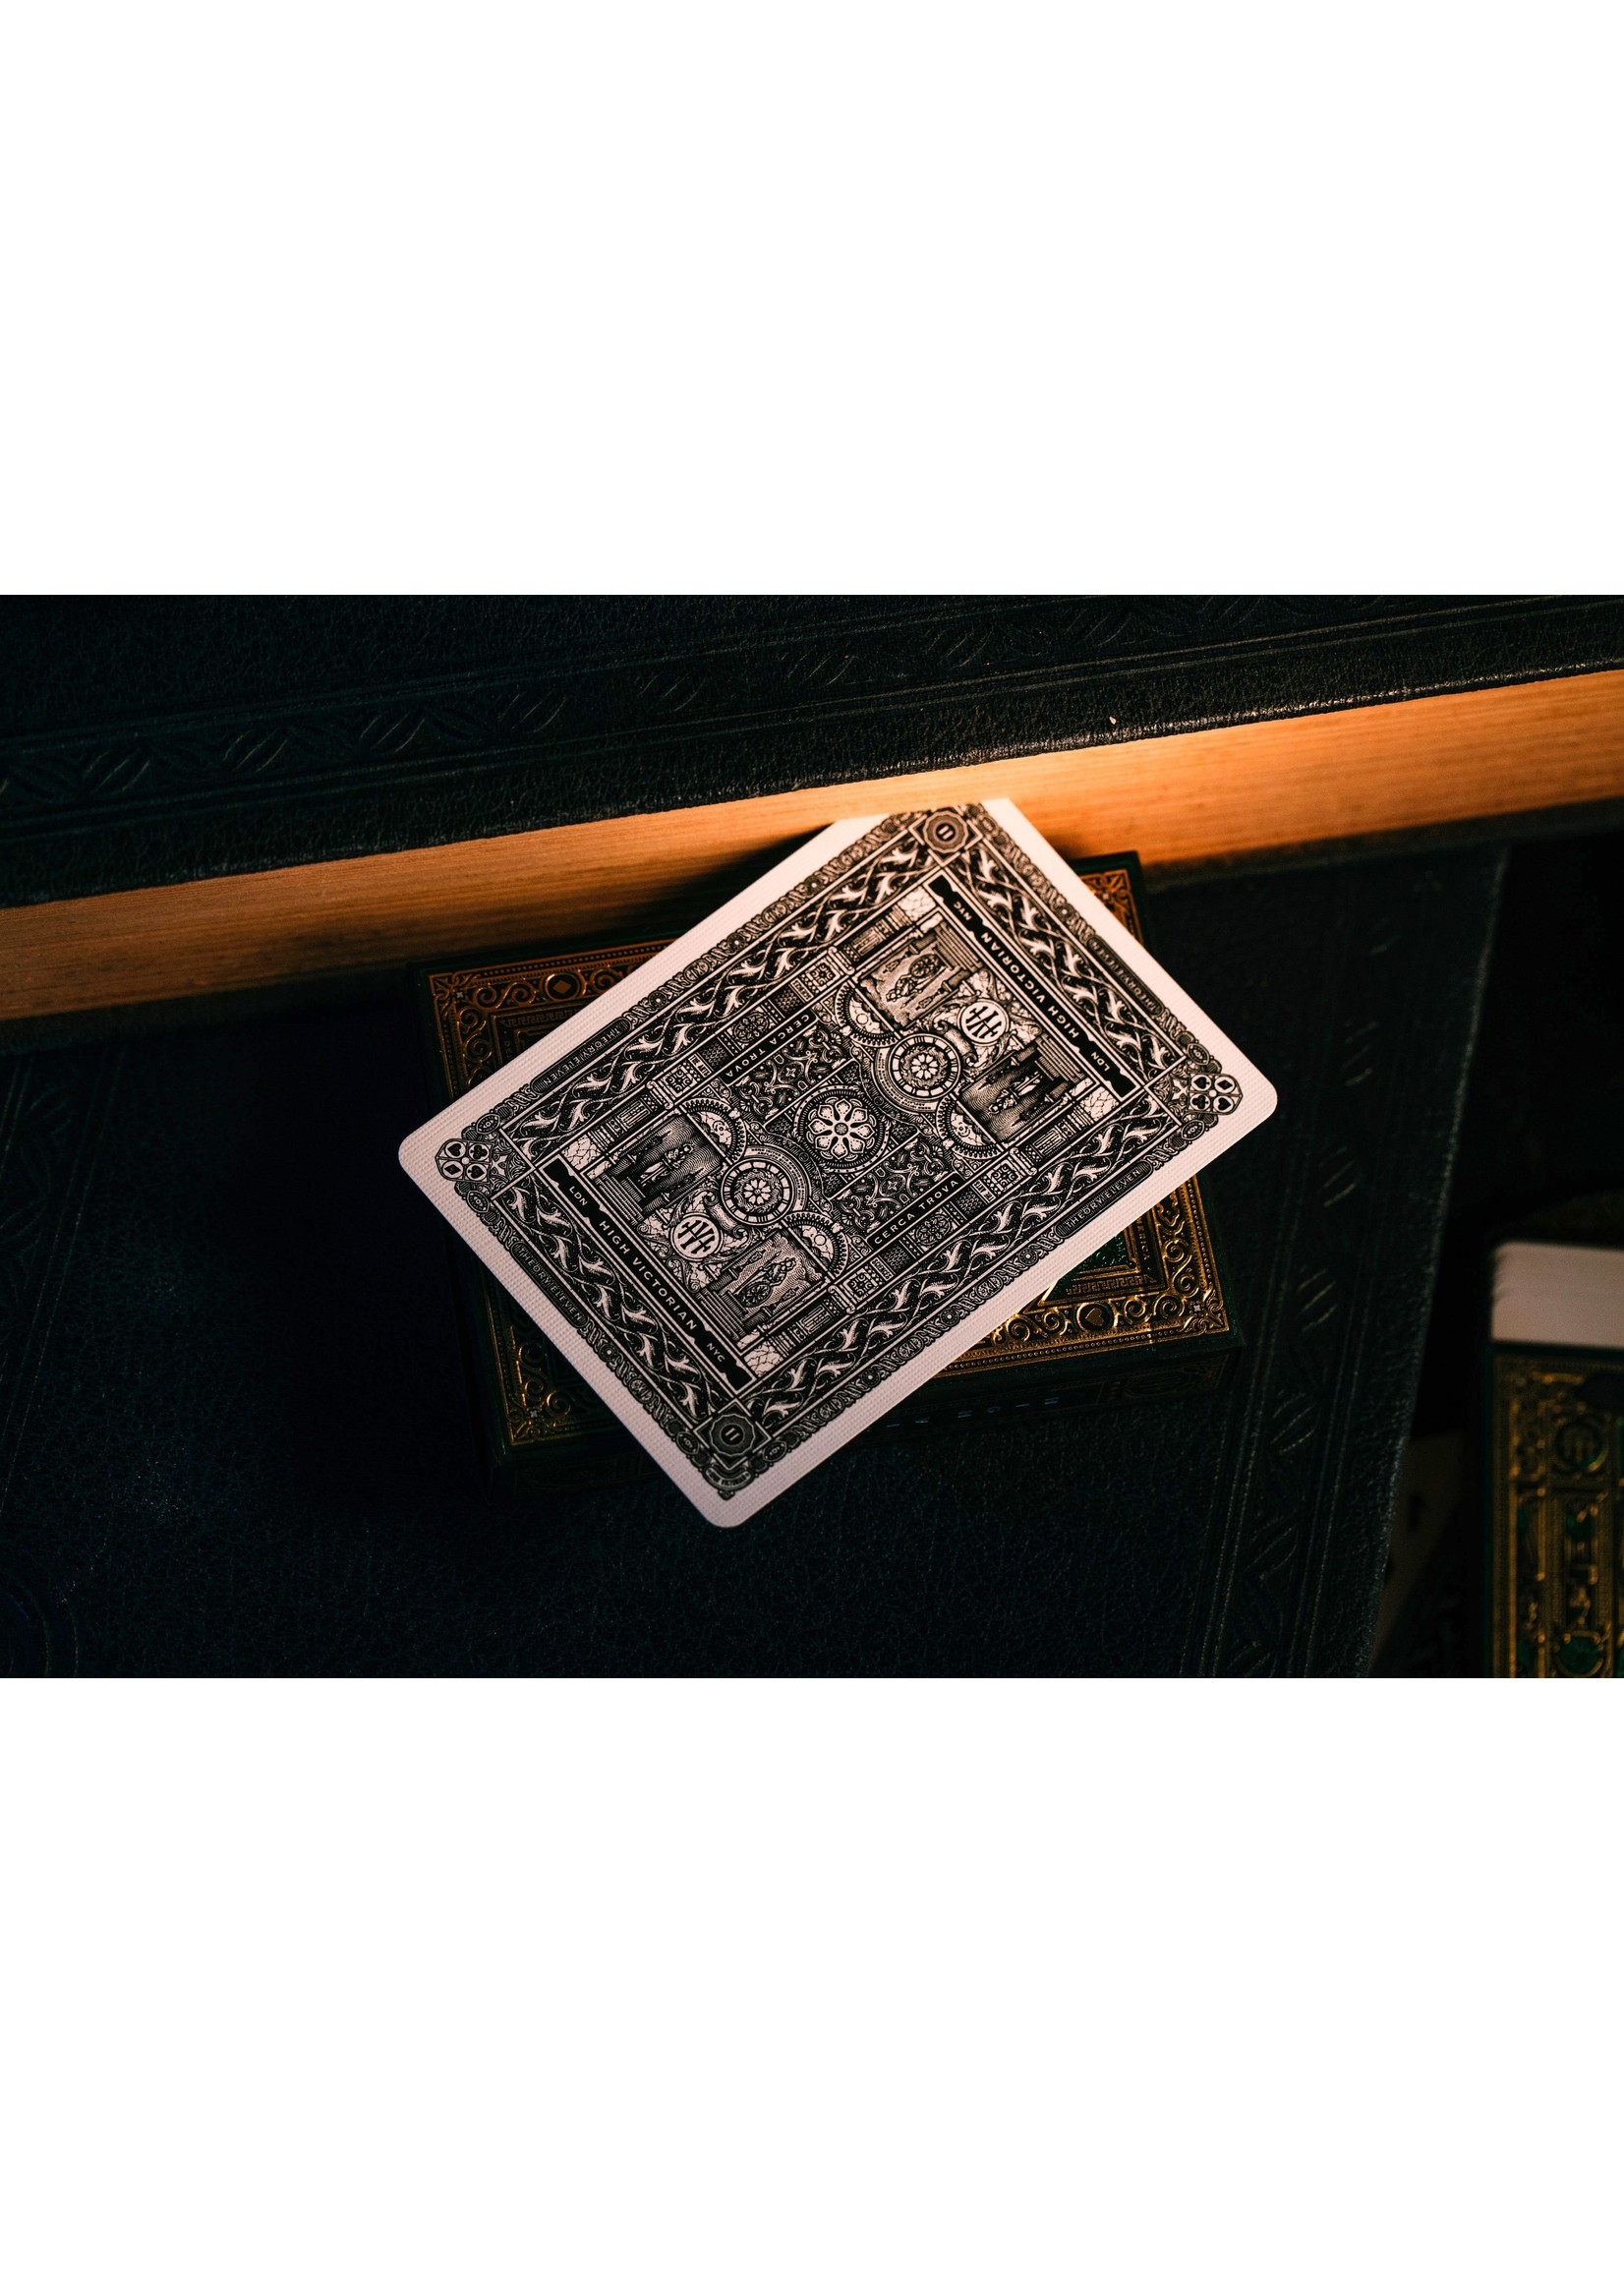 Theory11 Theory11:  High Victorian Playing Cards